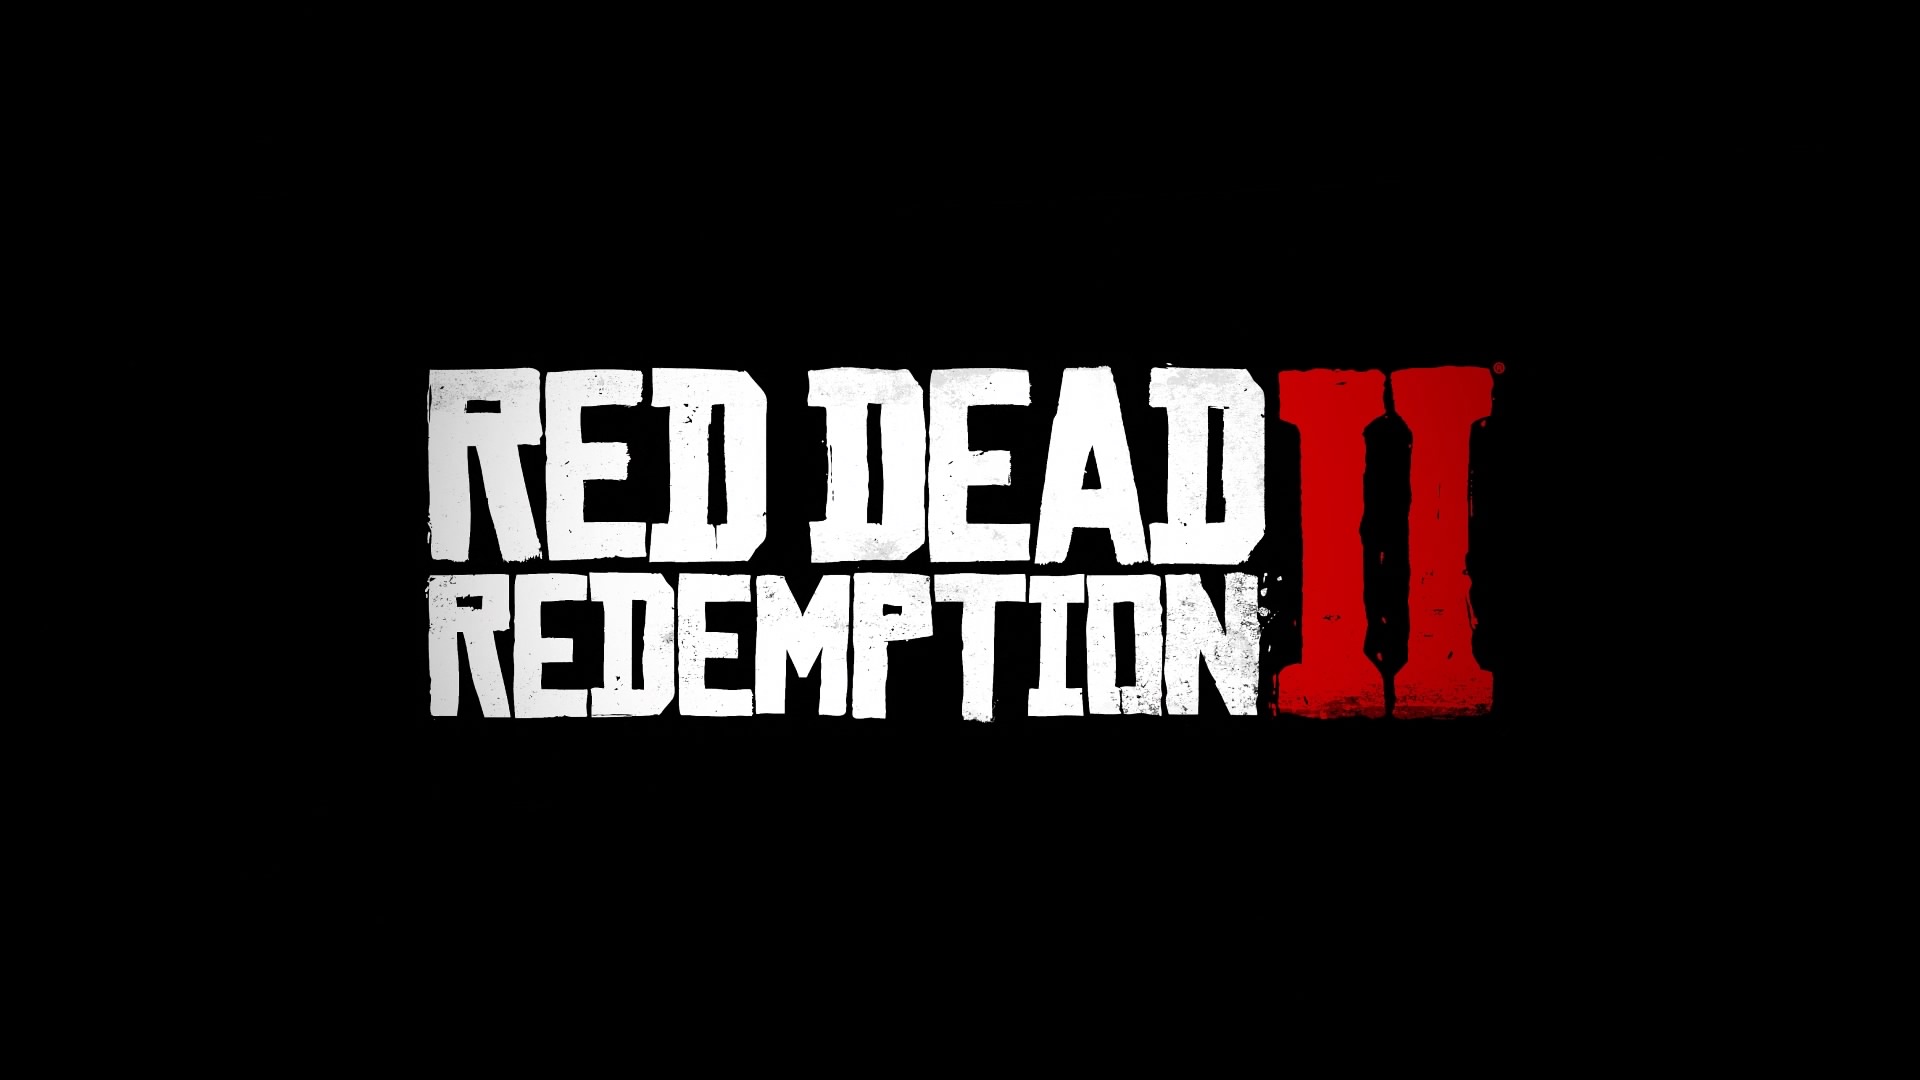 Red Dead Redemption 2 (2018 – Western – Playstation 4)